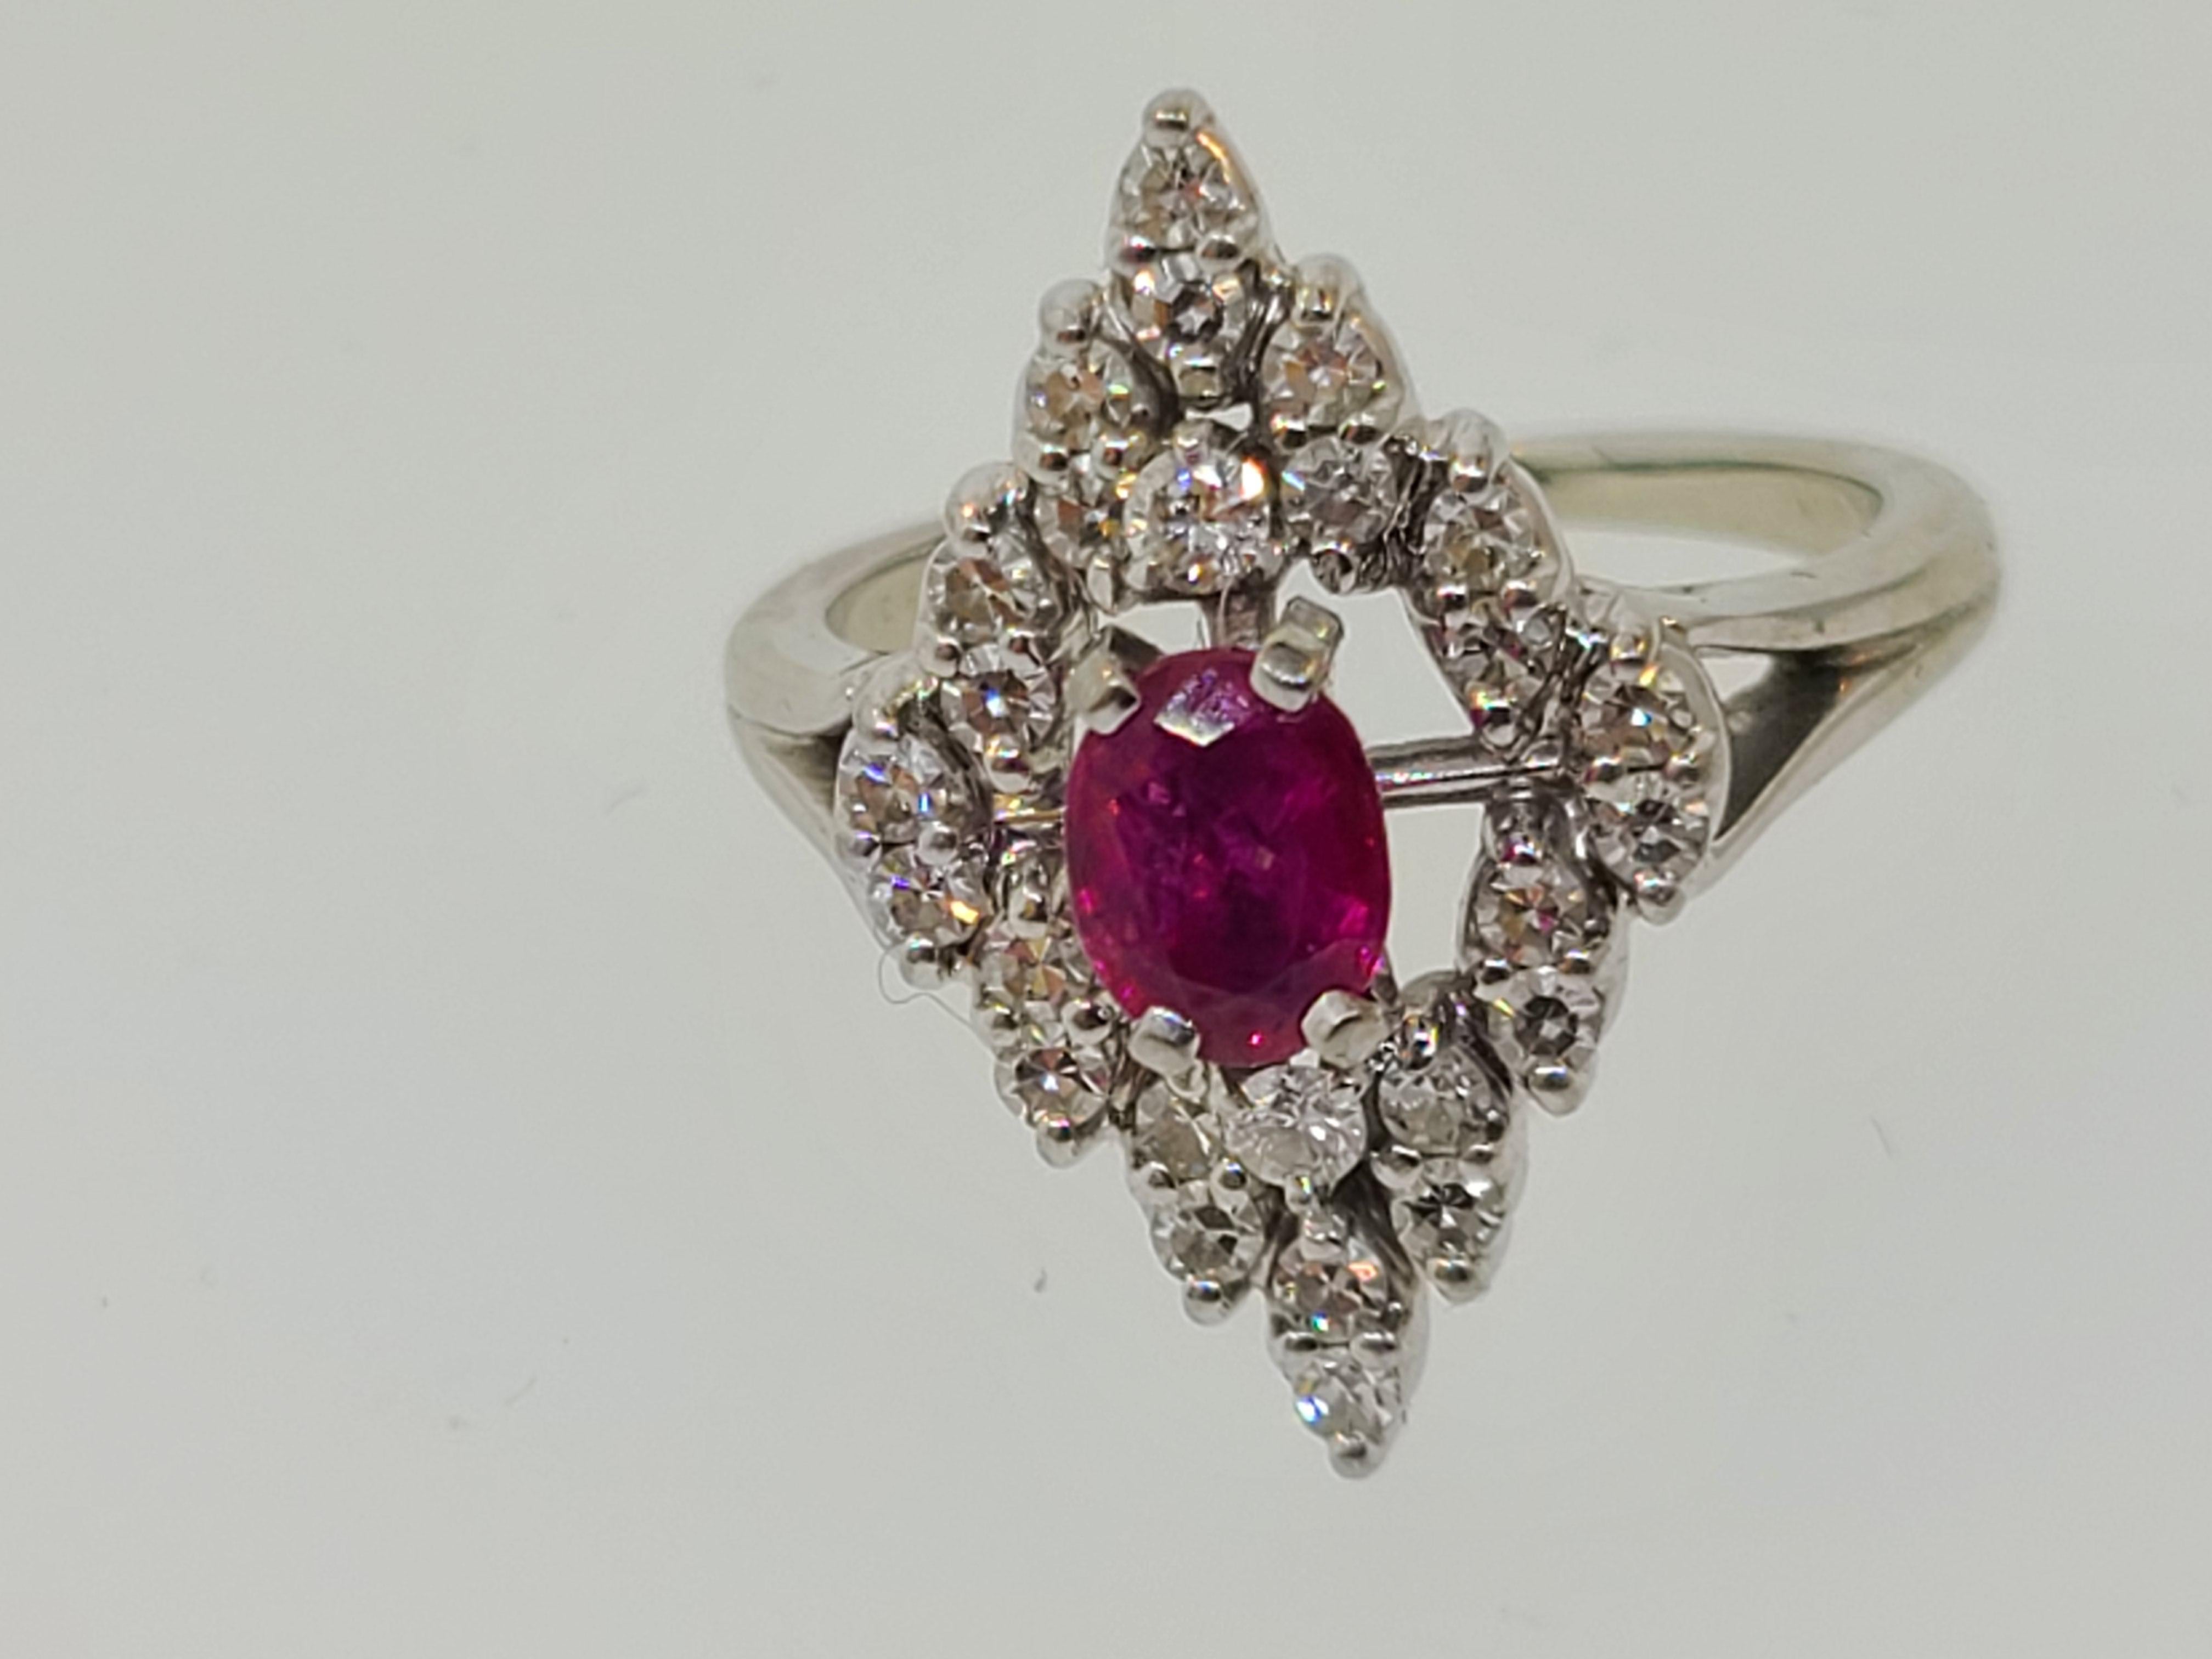 This wonderful estate found 18K white gold cocktail ring has a 5.7x4.4mm oval cut lab created ruby center stone surrounded by a cluster of 26 round cut diamonds in a diamond shape. There is some wear to the rhodium plating. 
Ring size 6 (US)
Total